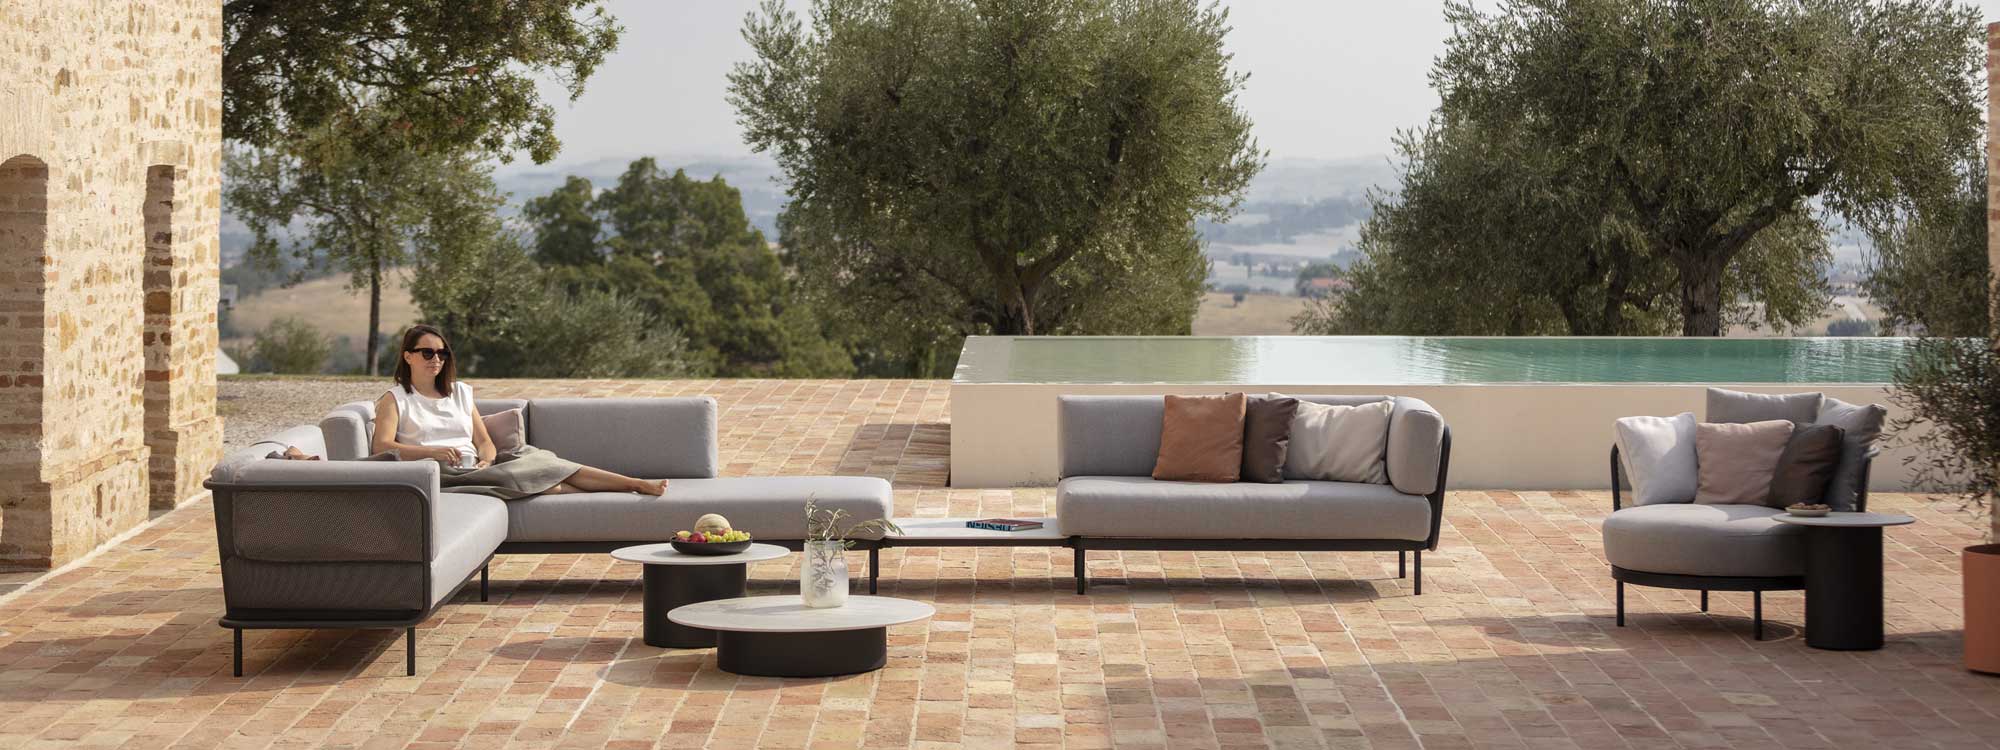 Image of large Baza garden sofa on sunny terrace with Branta low tables in the centre